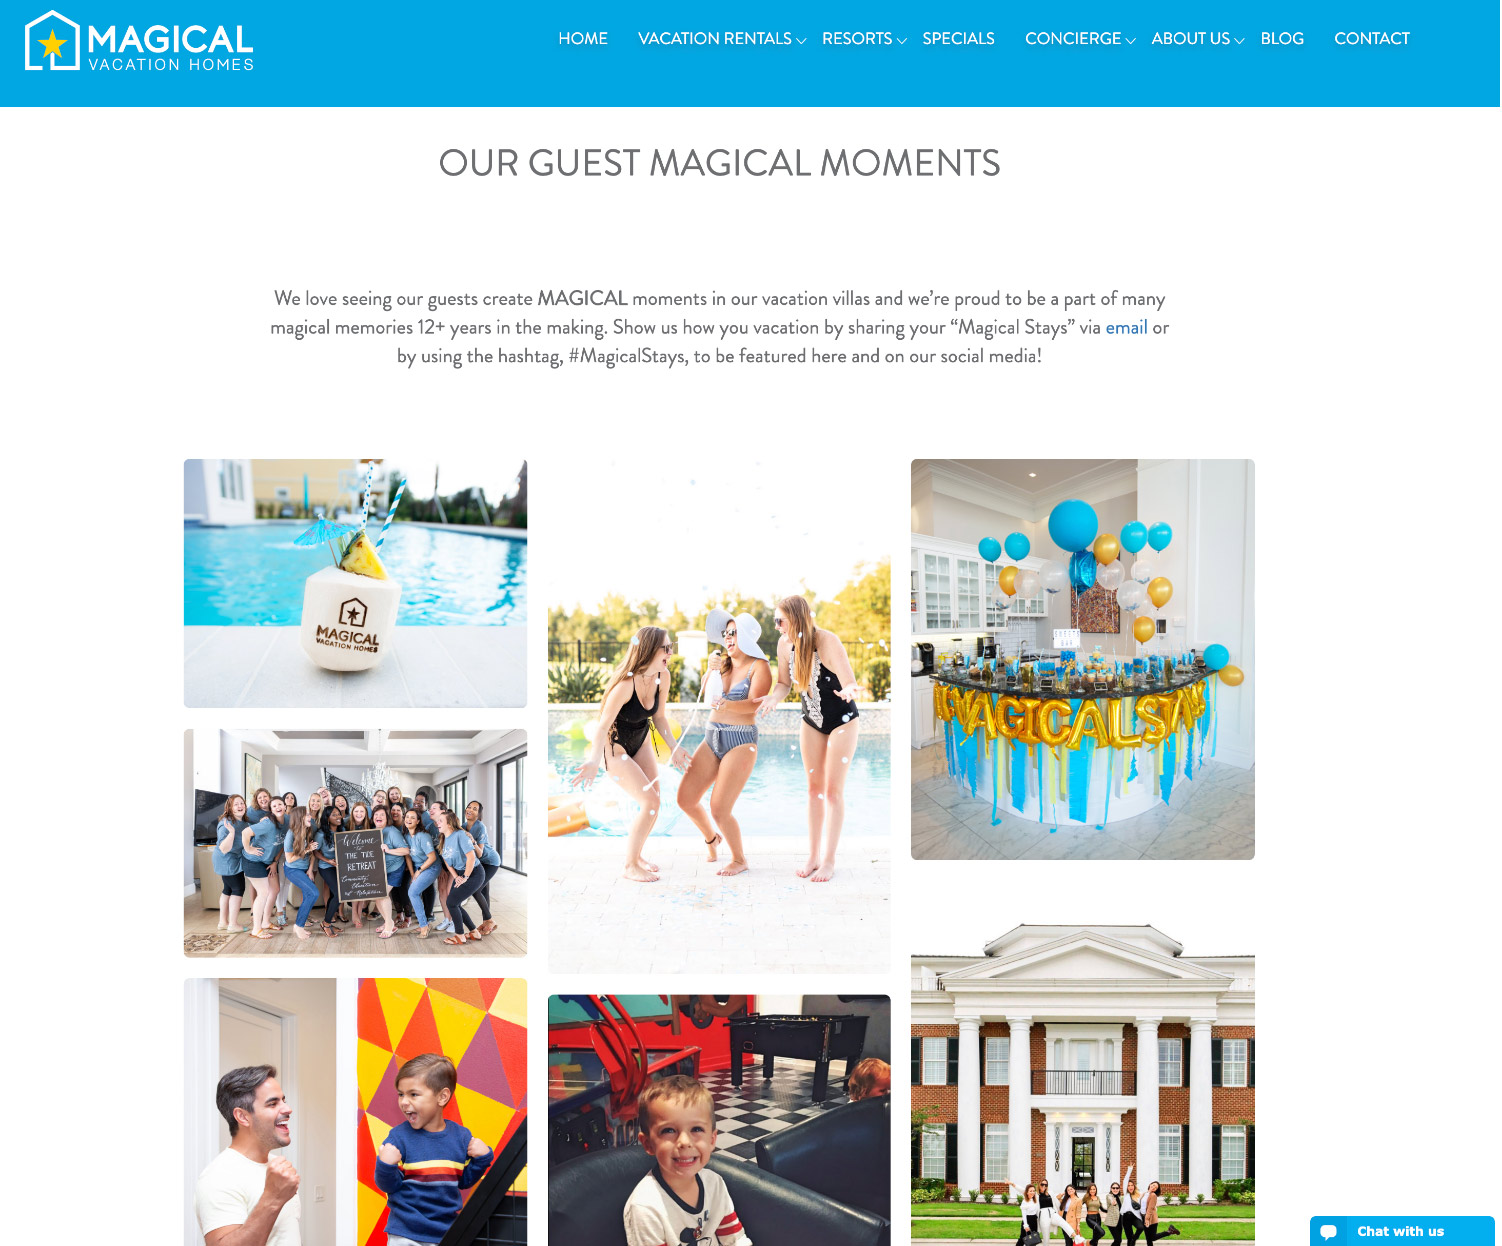 Main page of Our Guests Magical Moments on the Magical Vacation Homes website, featuring photos of prior guest stays.